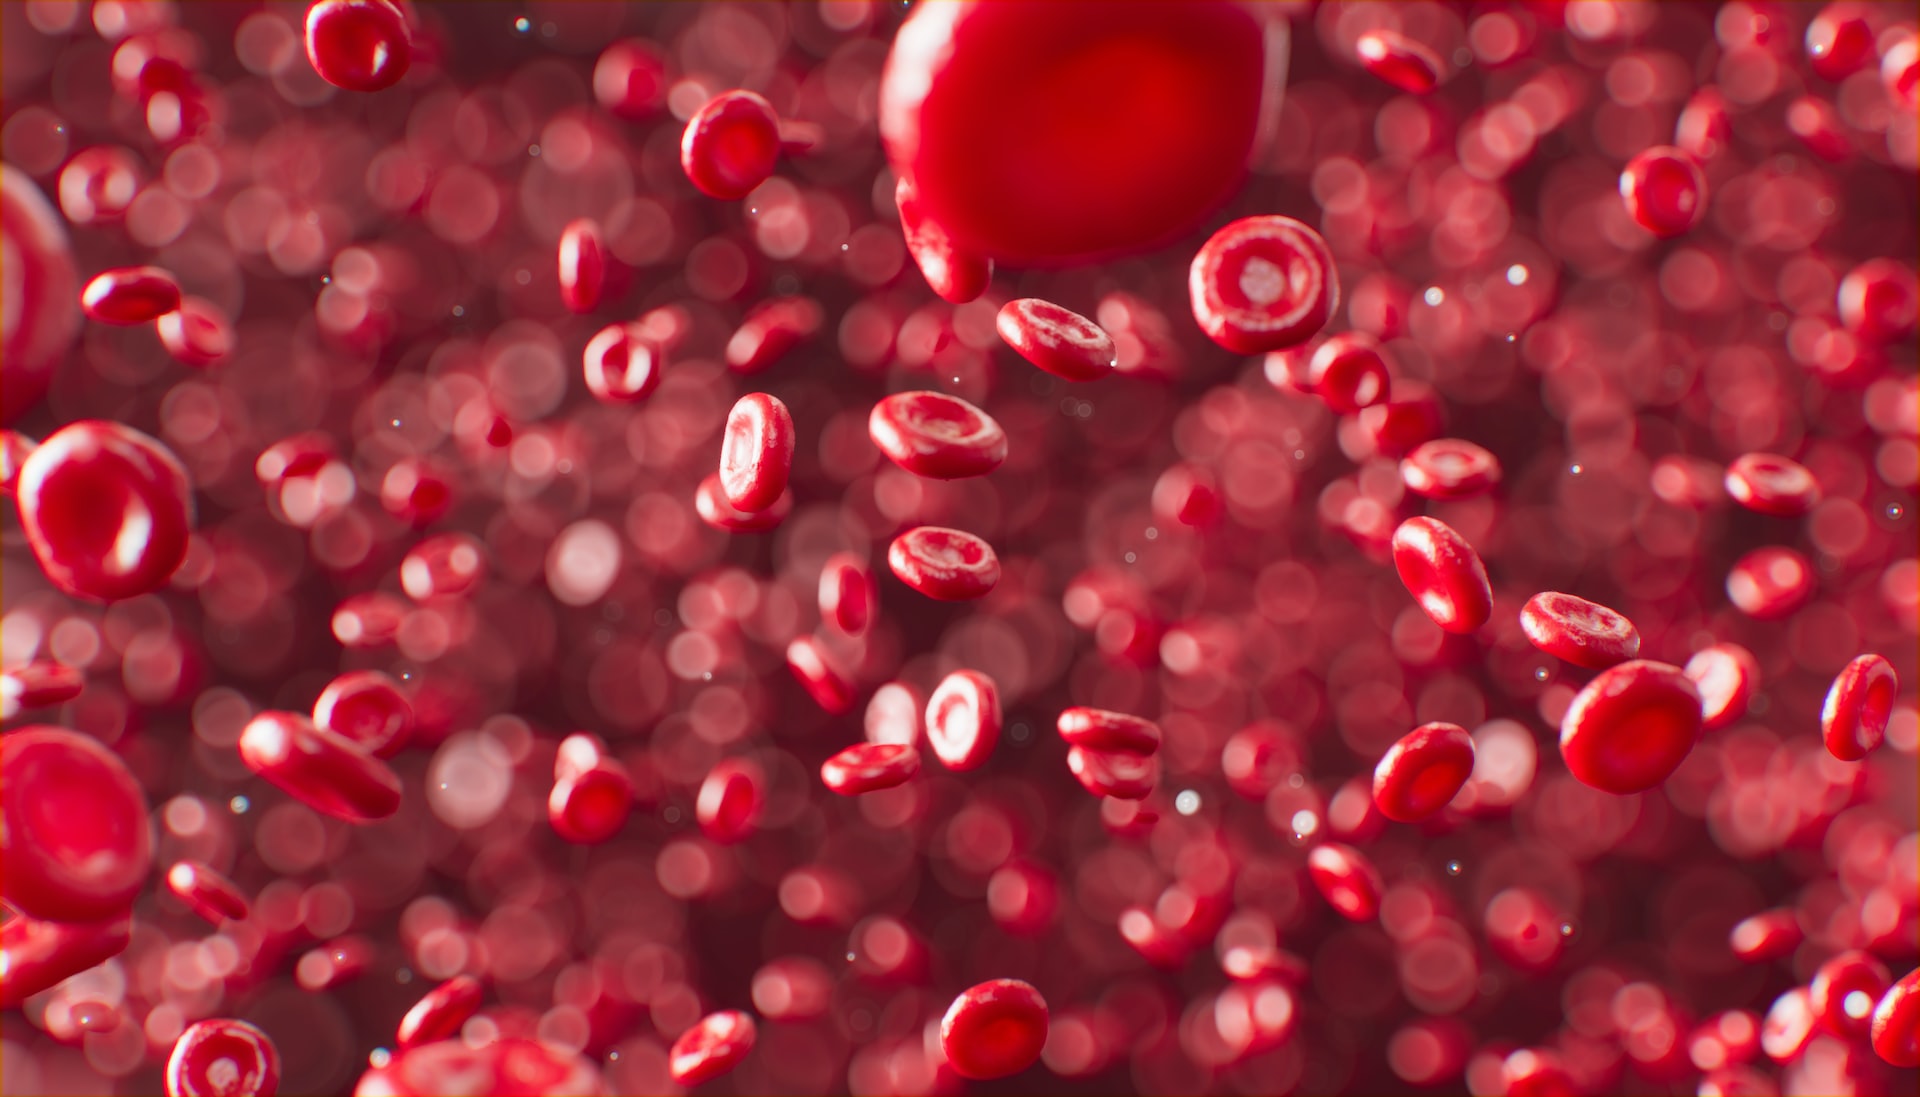 Red Blood Cells In The Human Body